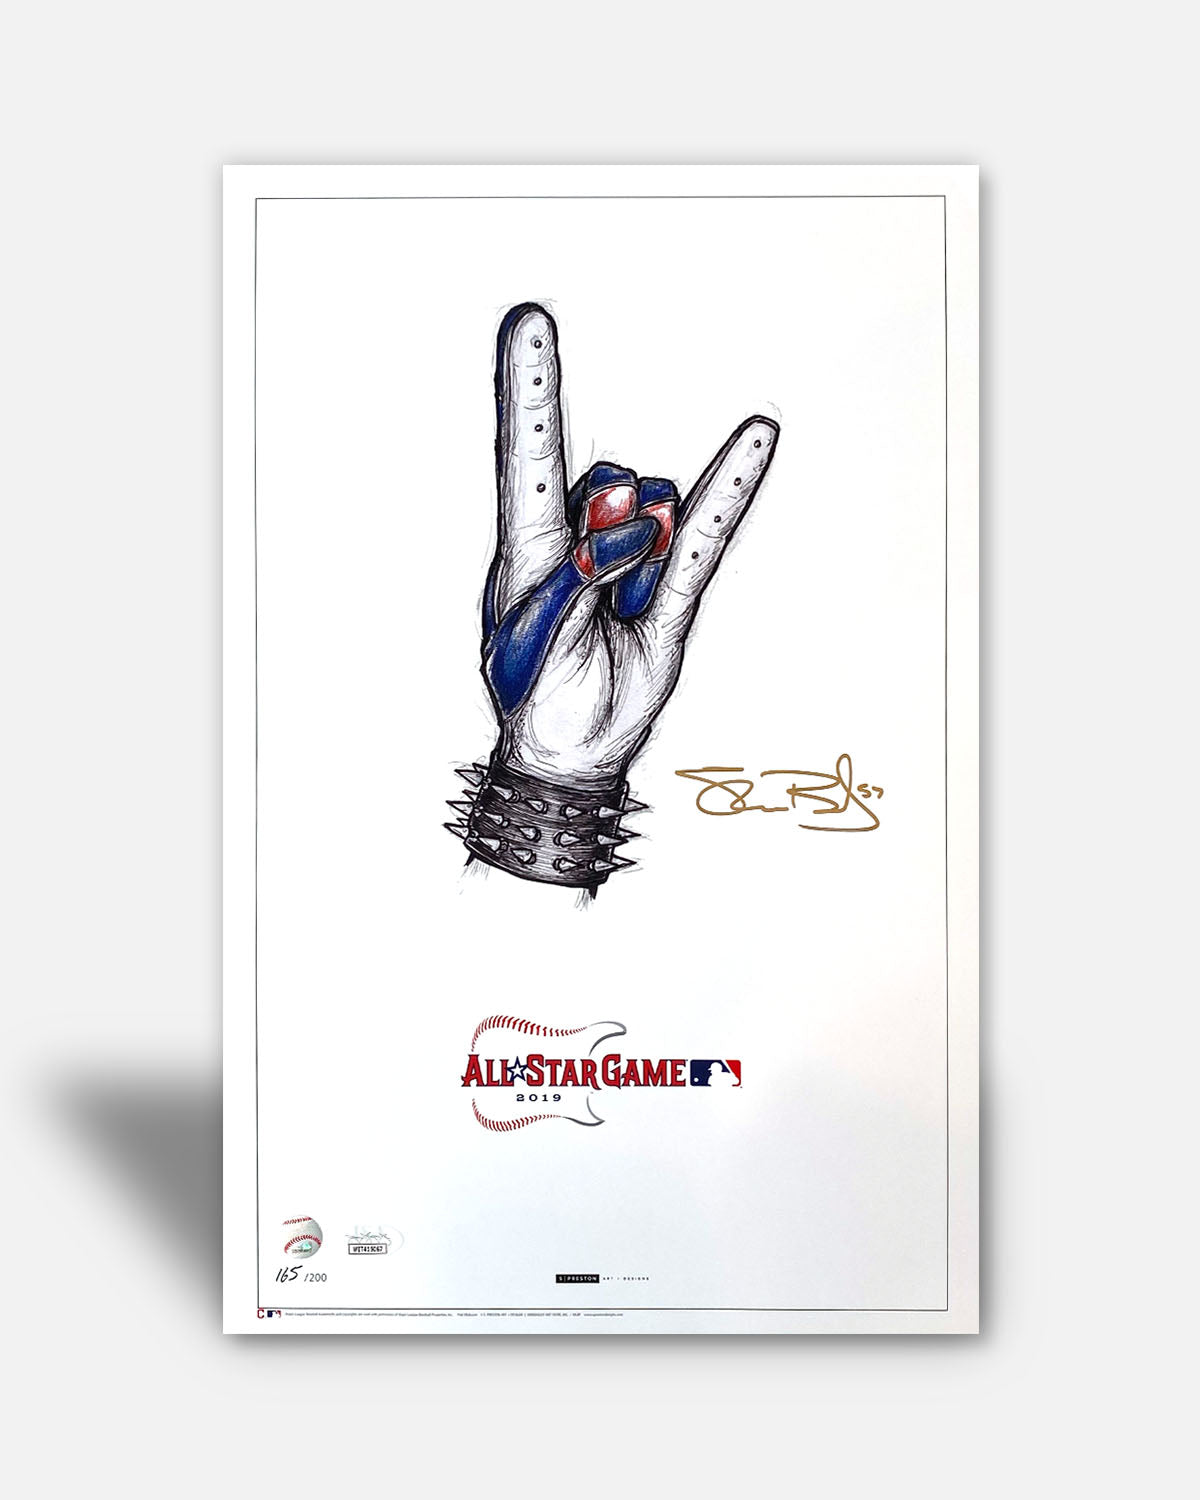 All-Star Game 2019 Sketch Print - Shane Bieber Signed - Poster Print - Authenticated